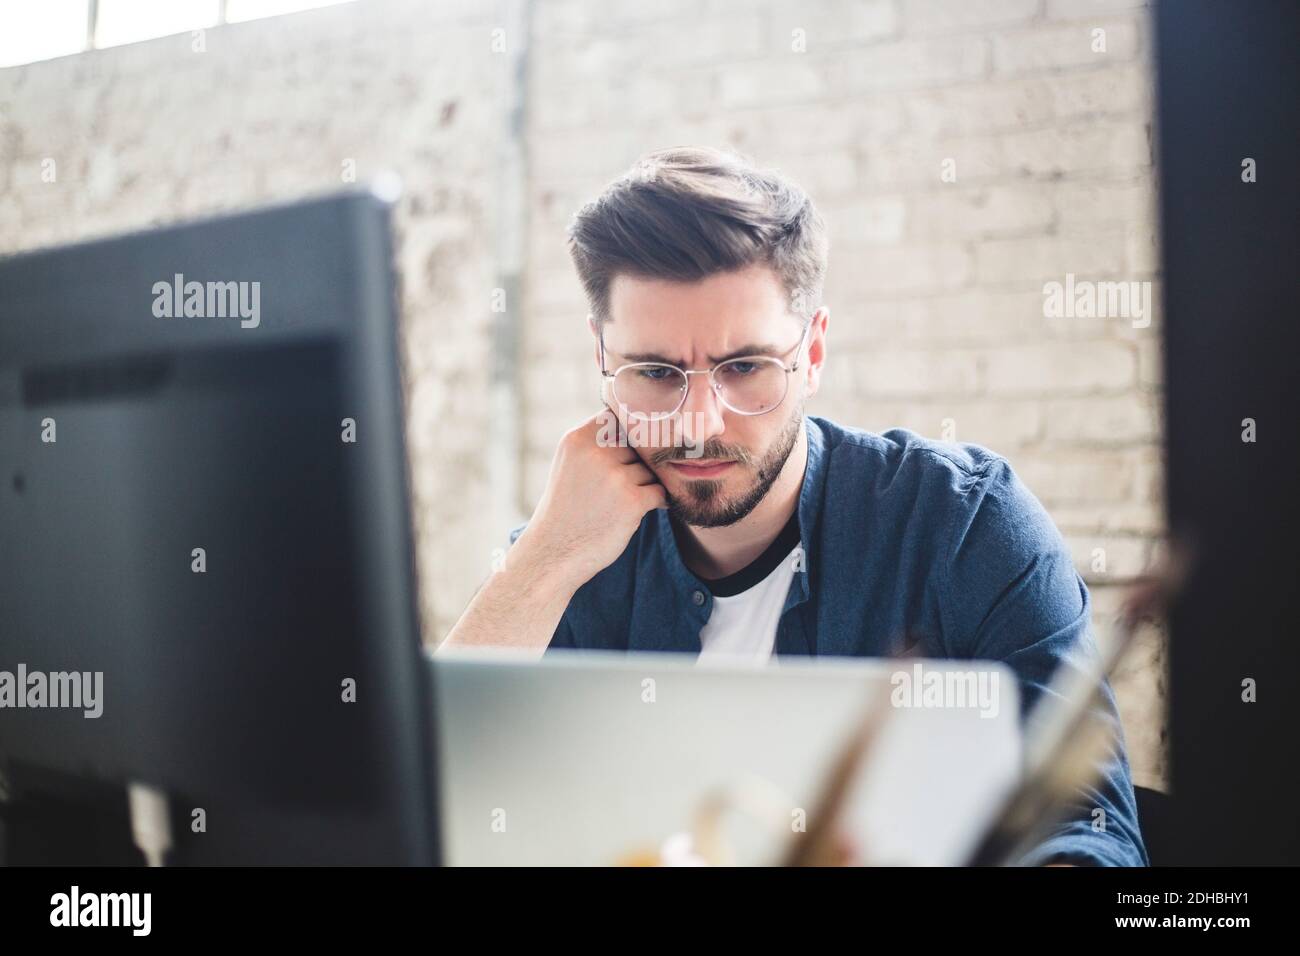 Male IT professional thinking while working on computer codes in laptop at workplace Stock Photo